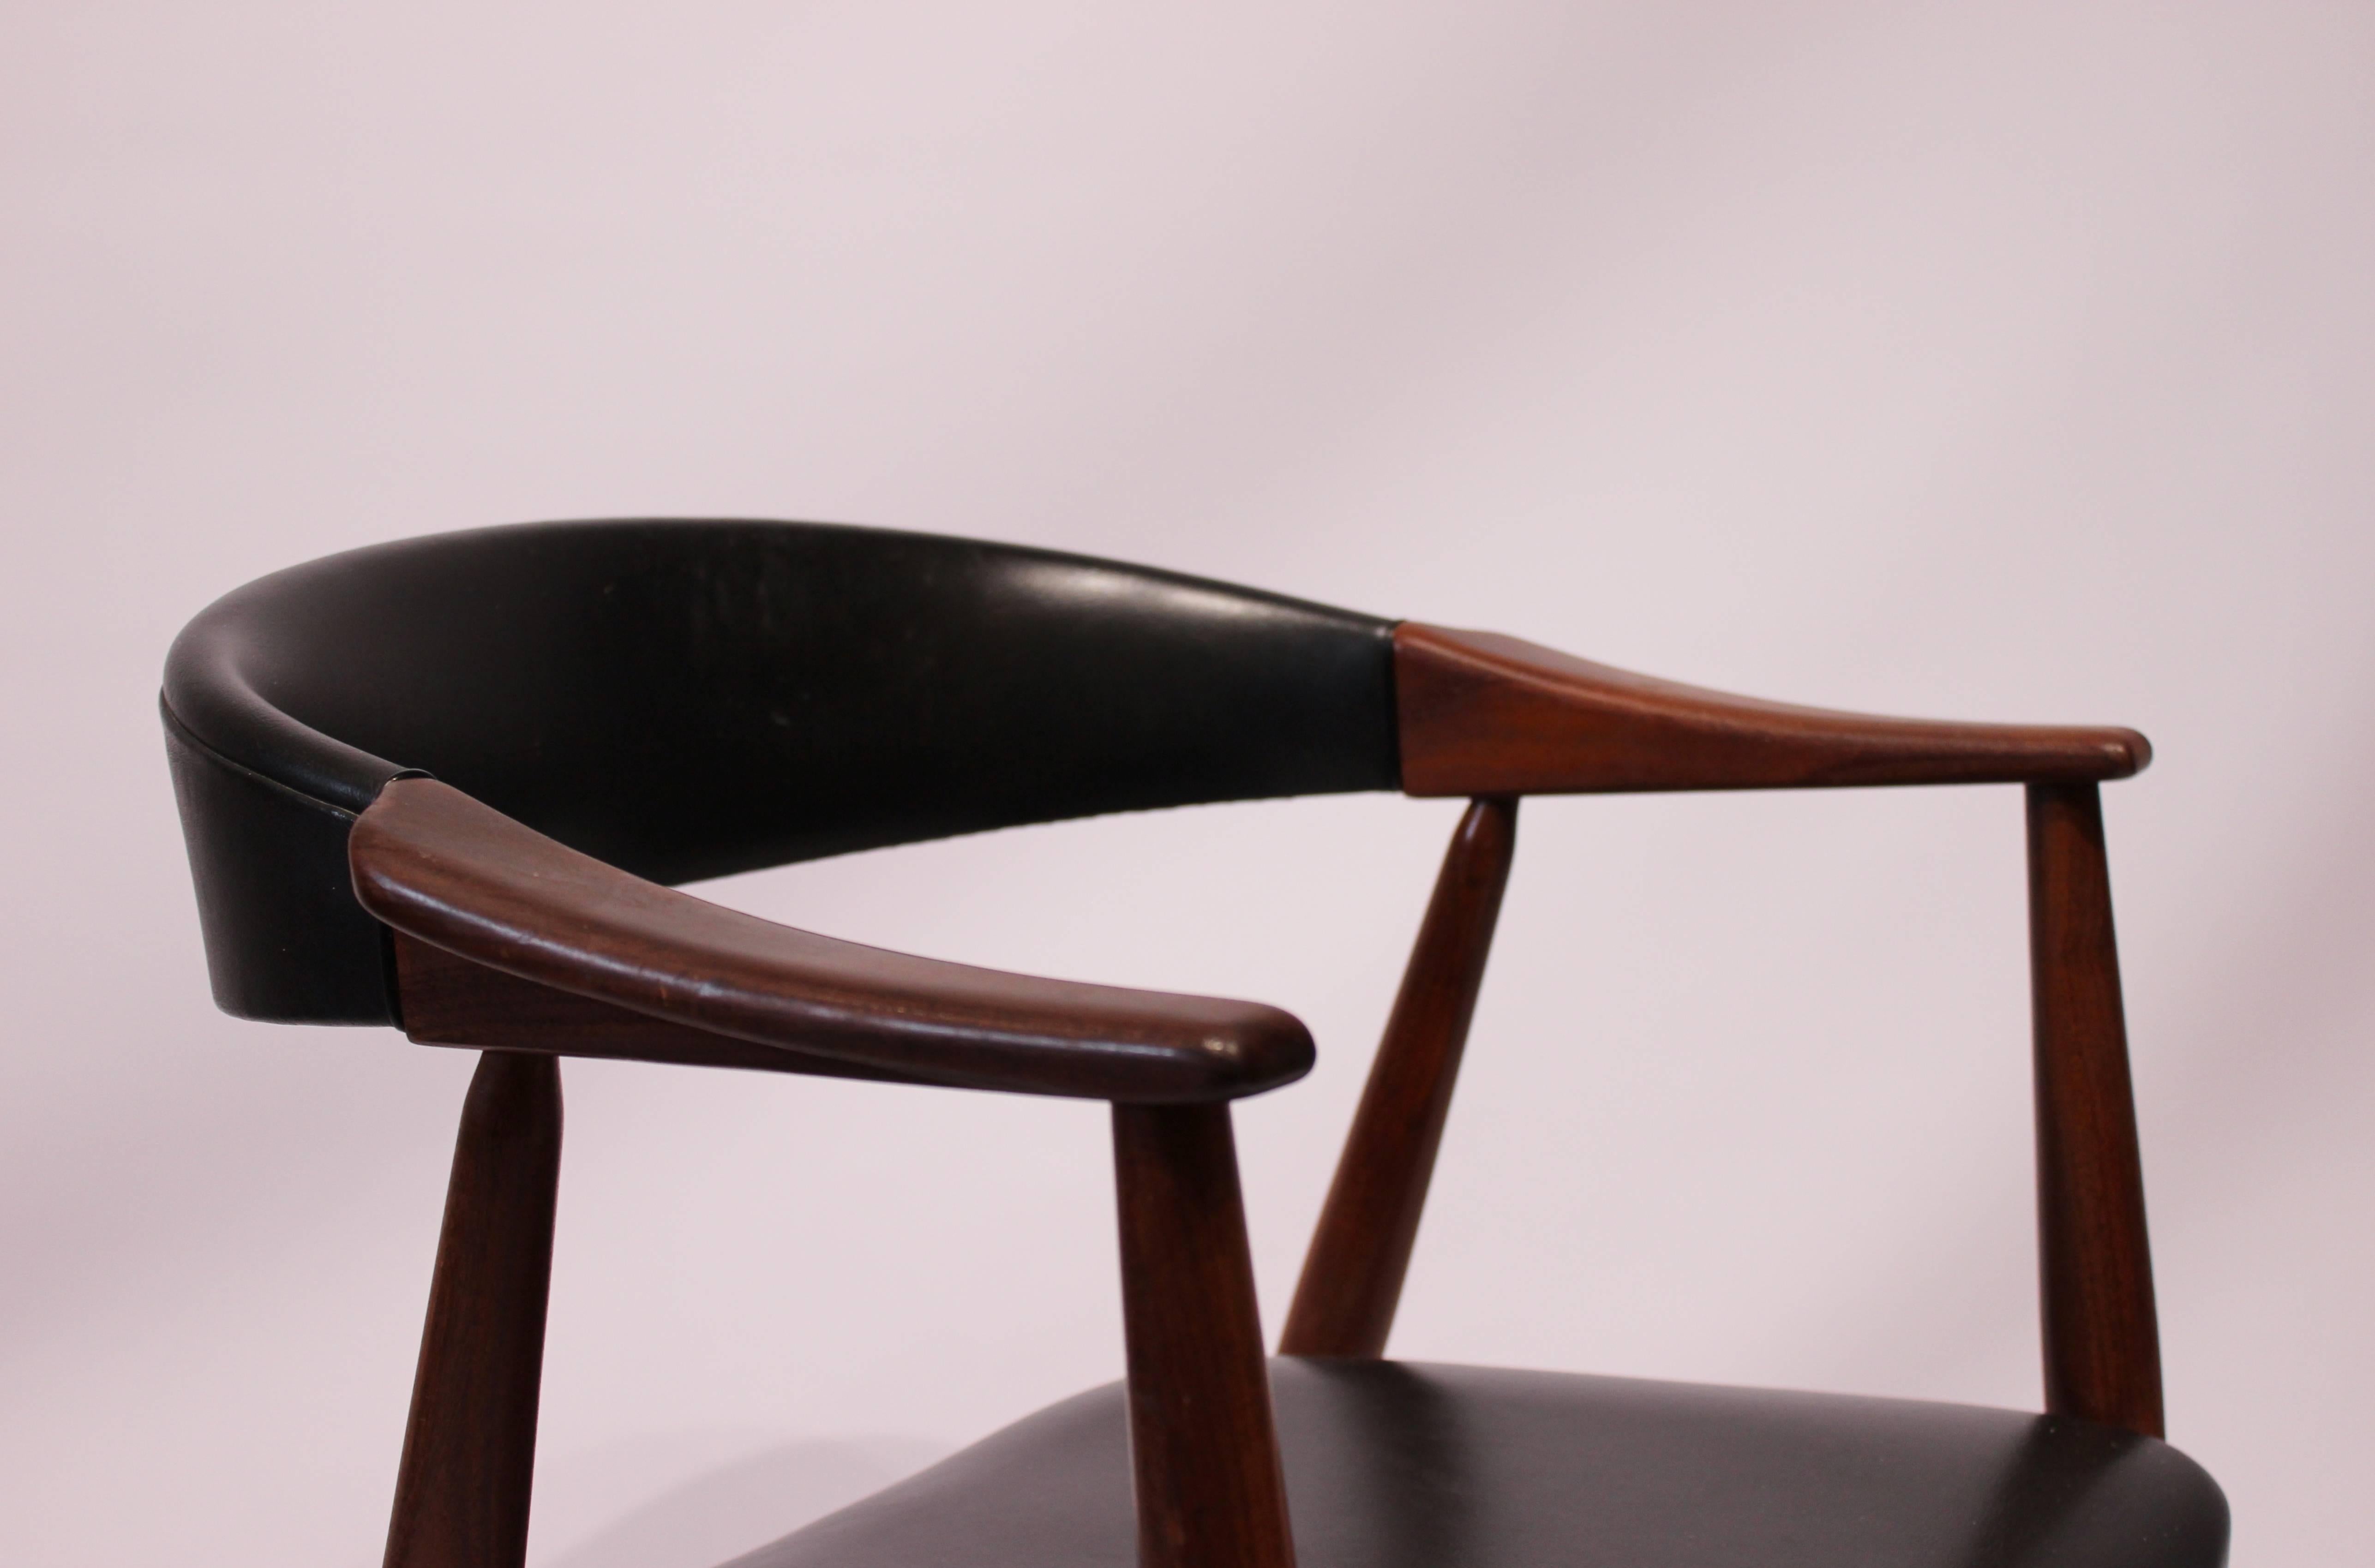 Scandinavian Modern Armchair in Teak and Black Classic Leather of Danish Design from the 1960s